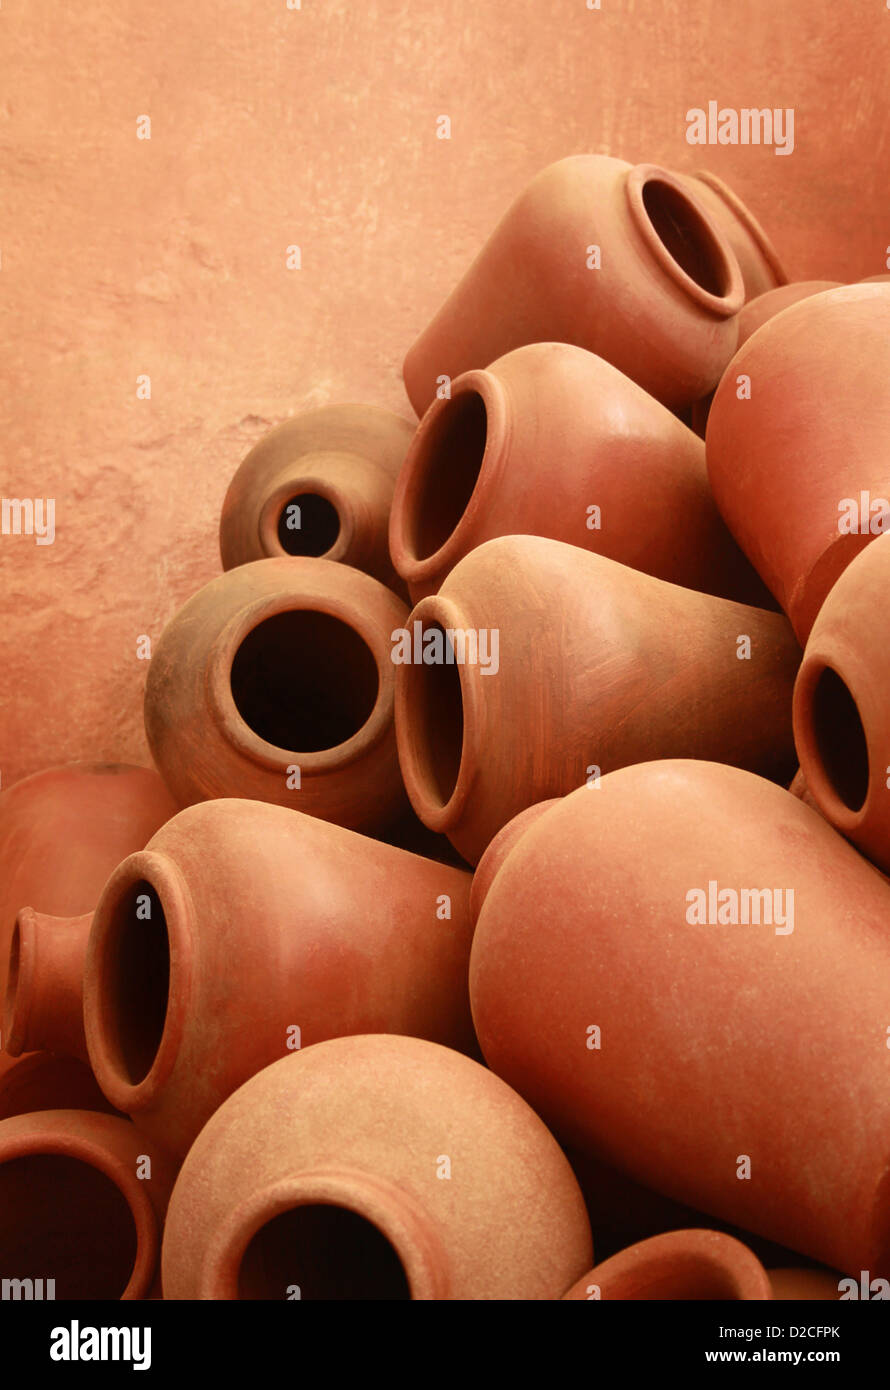 A stack of clay pots Stock Photo